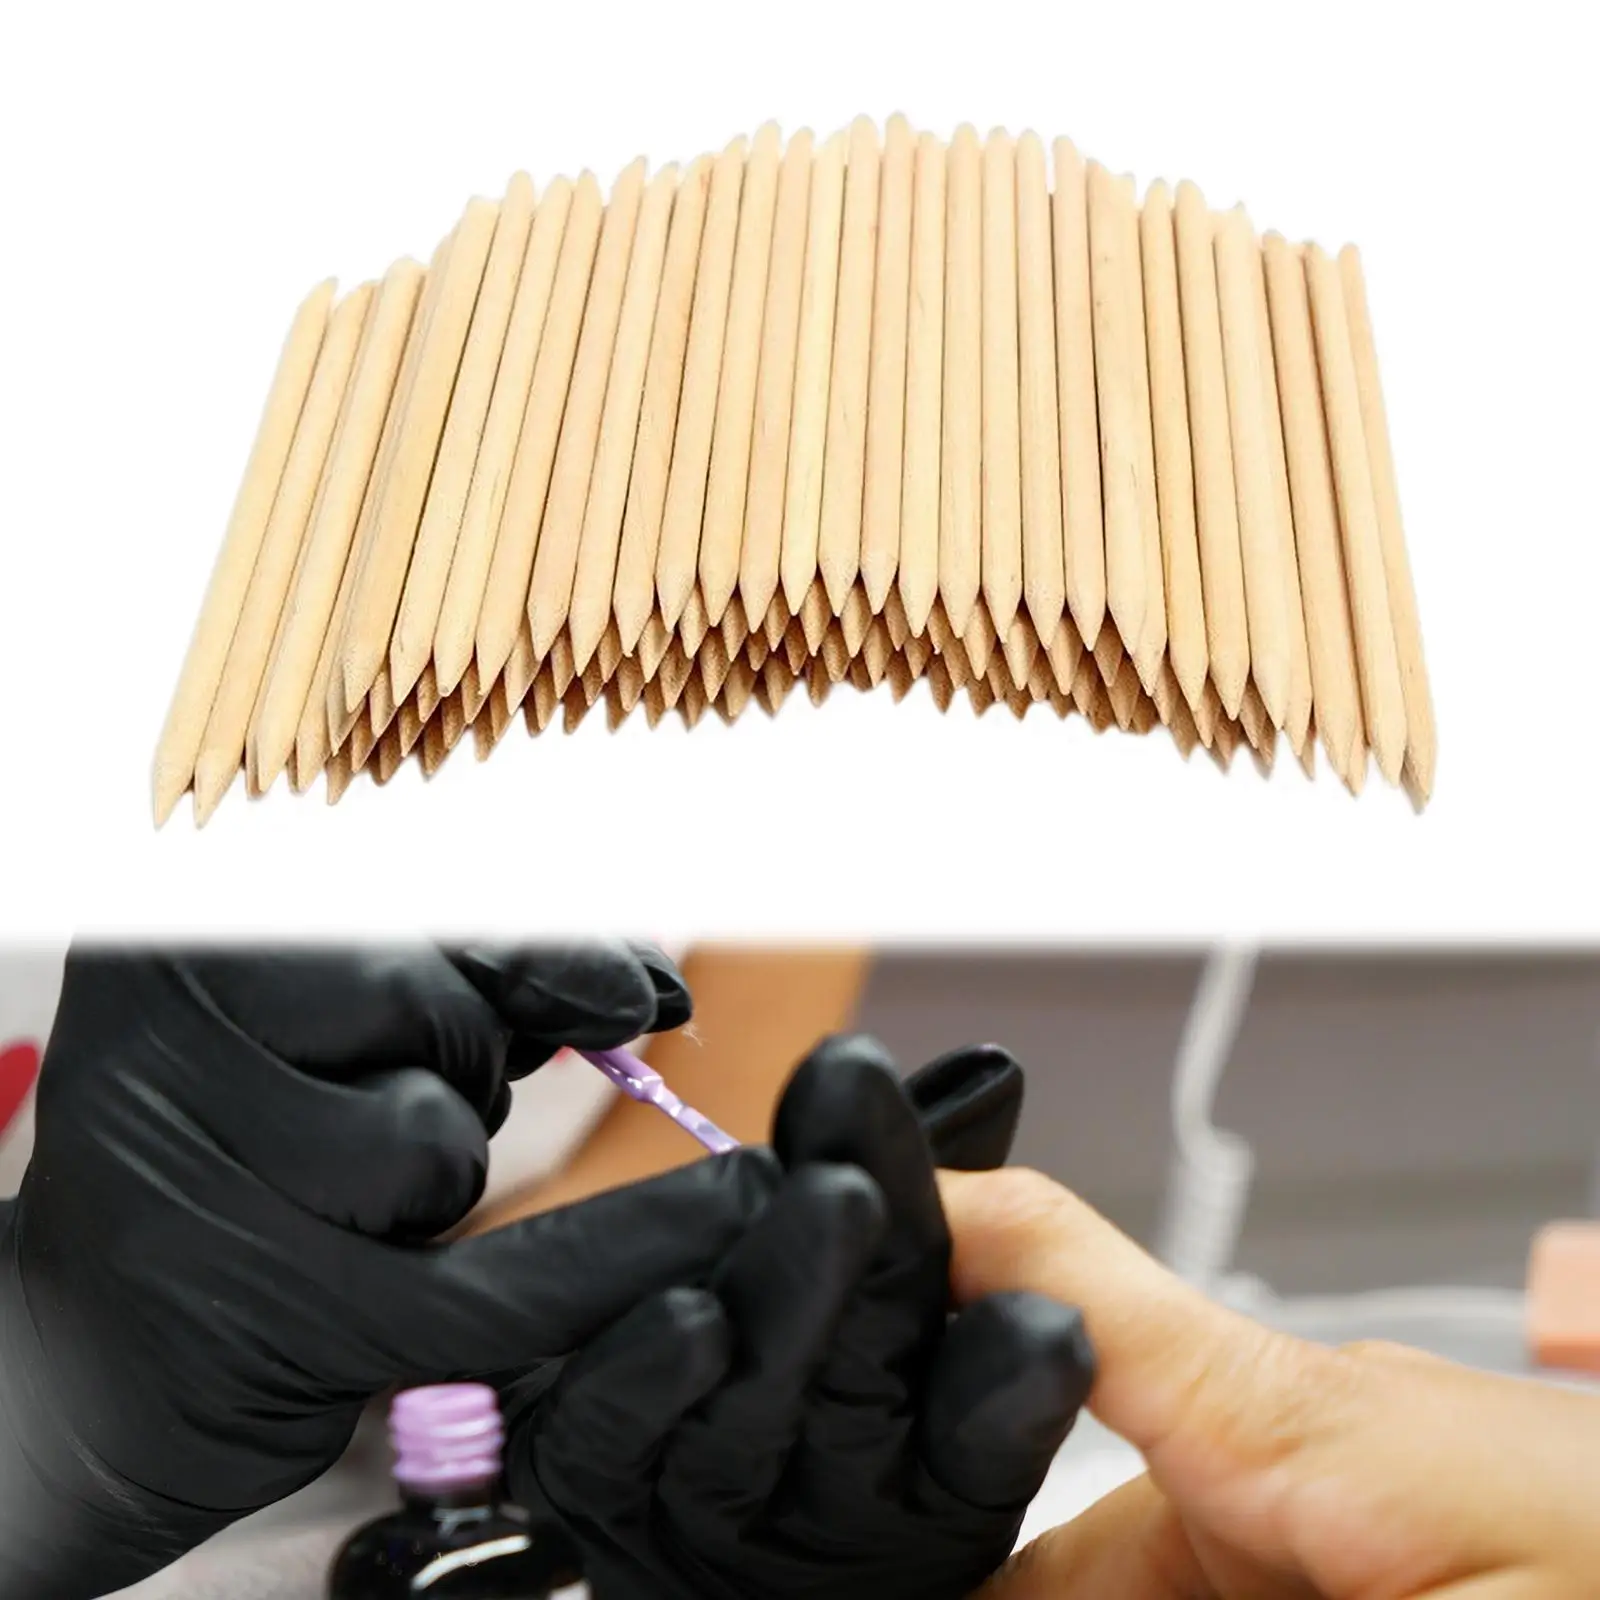 100Pieces Orange Sticks Disposable Manicure Supplies Multi Functional Useful Nail Cuticle Pusher for Nail Polish Home Salon